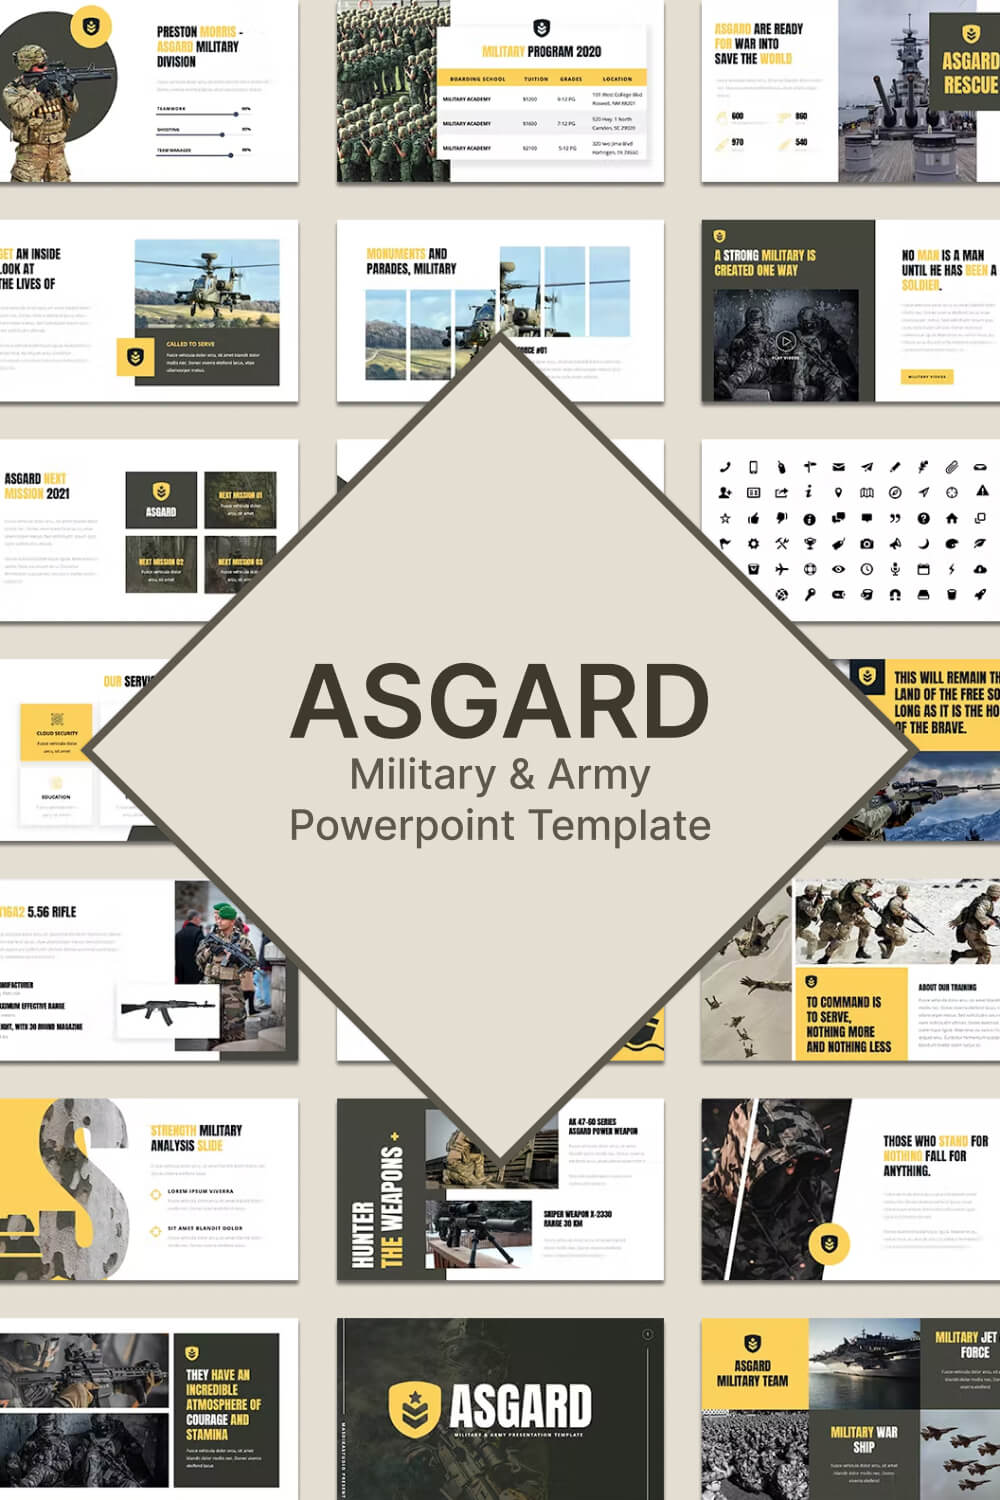 Lots of Asgard army powerpoint templates and a big "Asgard, Military & Army Powerpoint Template" diamond shaped logo.